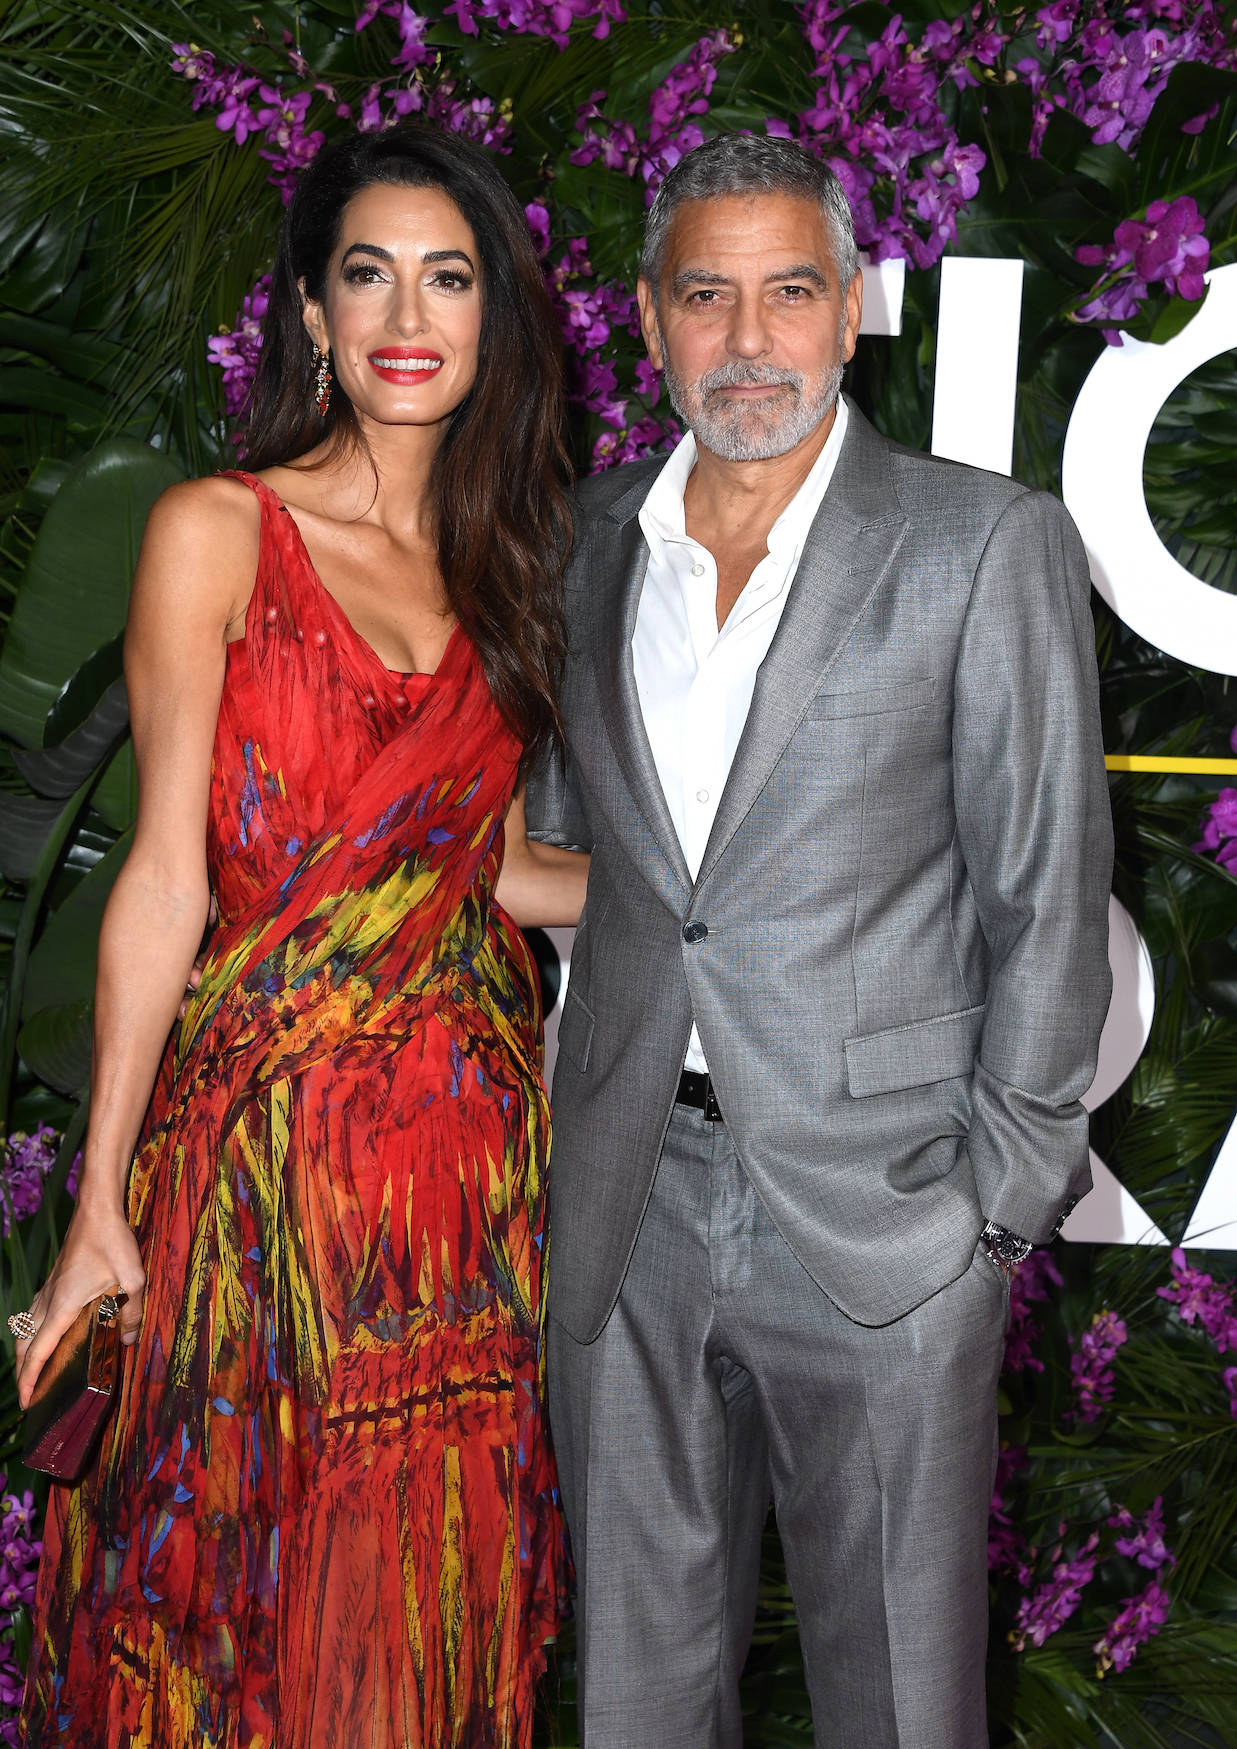 Close-up of Amal and George at a media event